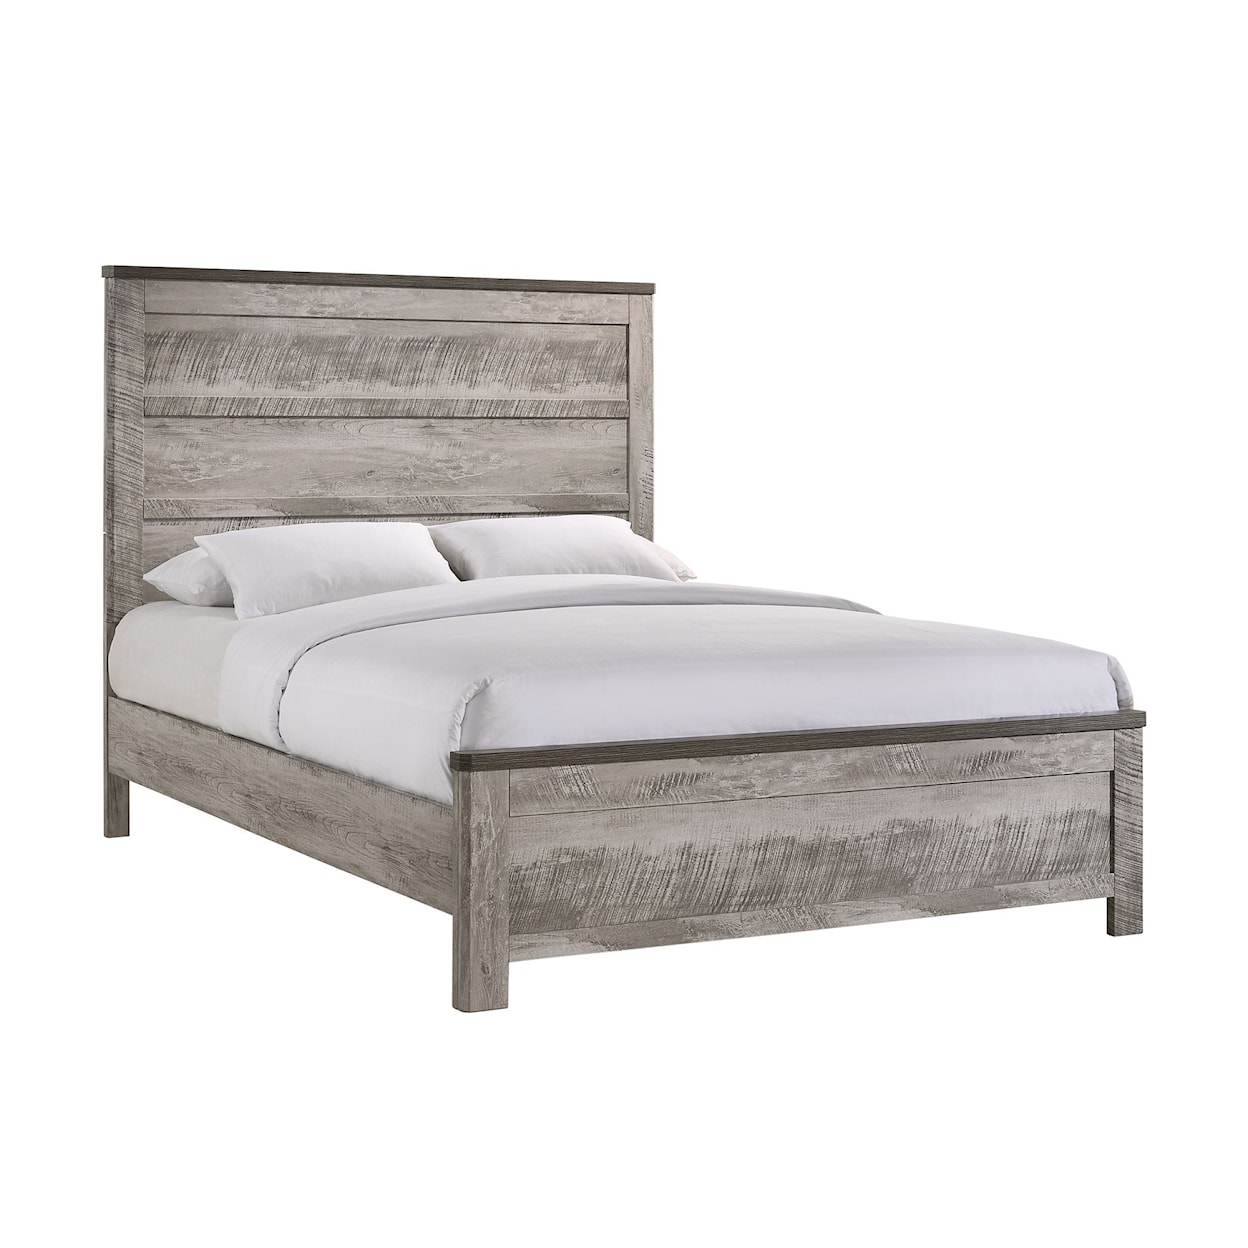 Elements International Millers Cove- Millers Cove Full 5PC Bedroom Set